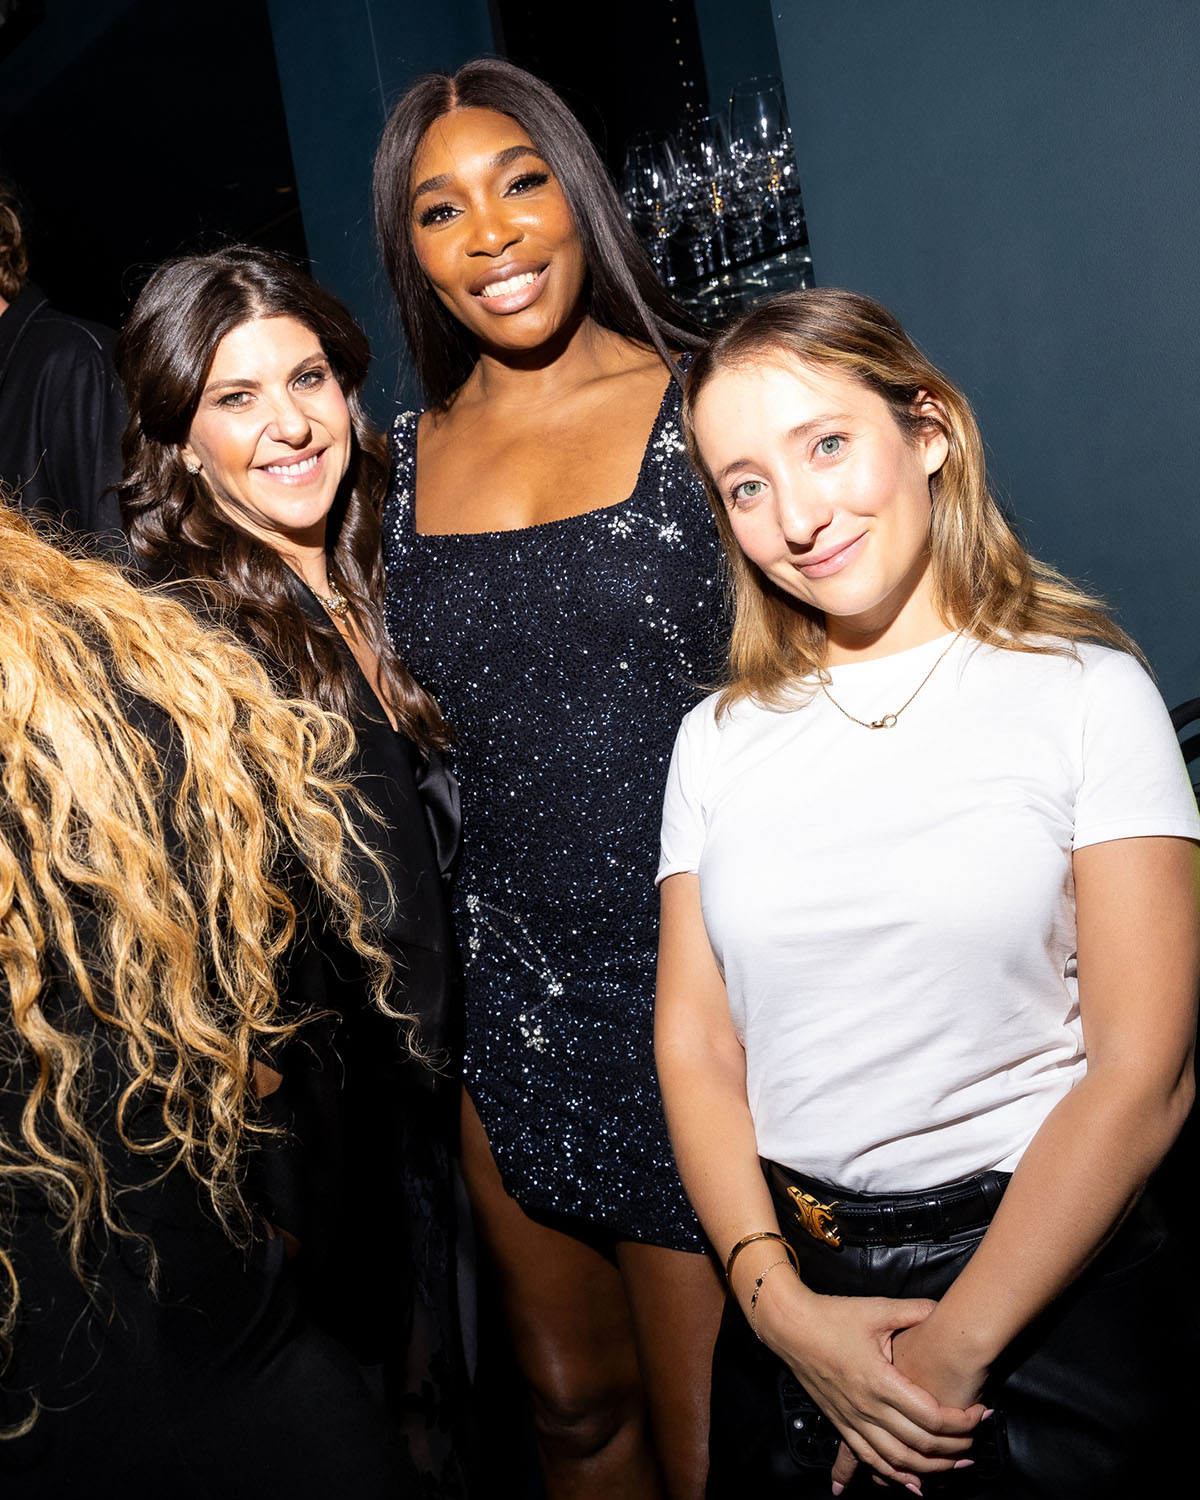 Gallery: Venus Williams launches her clothing collection in Montreal